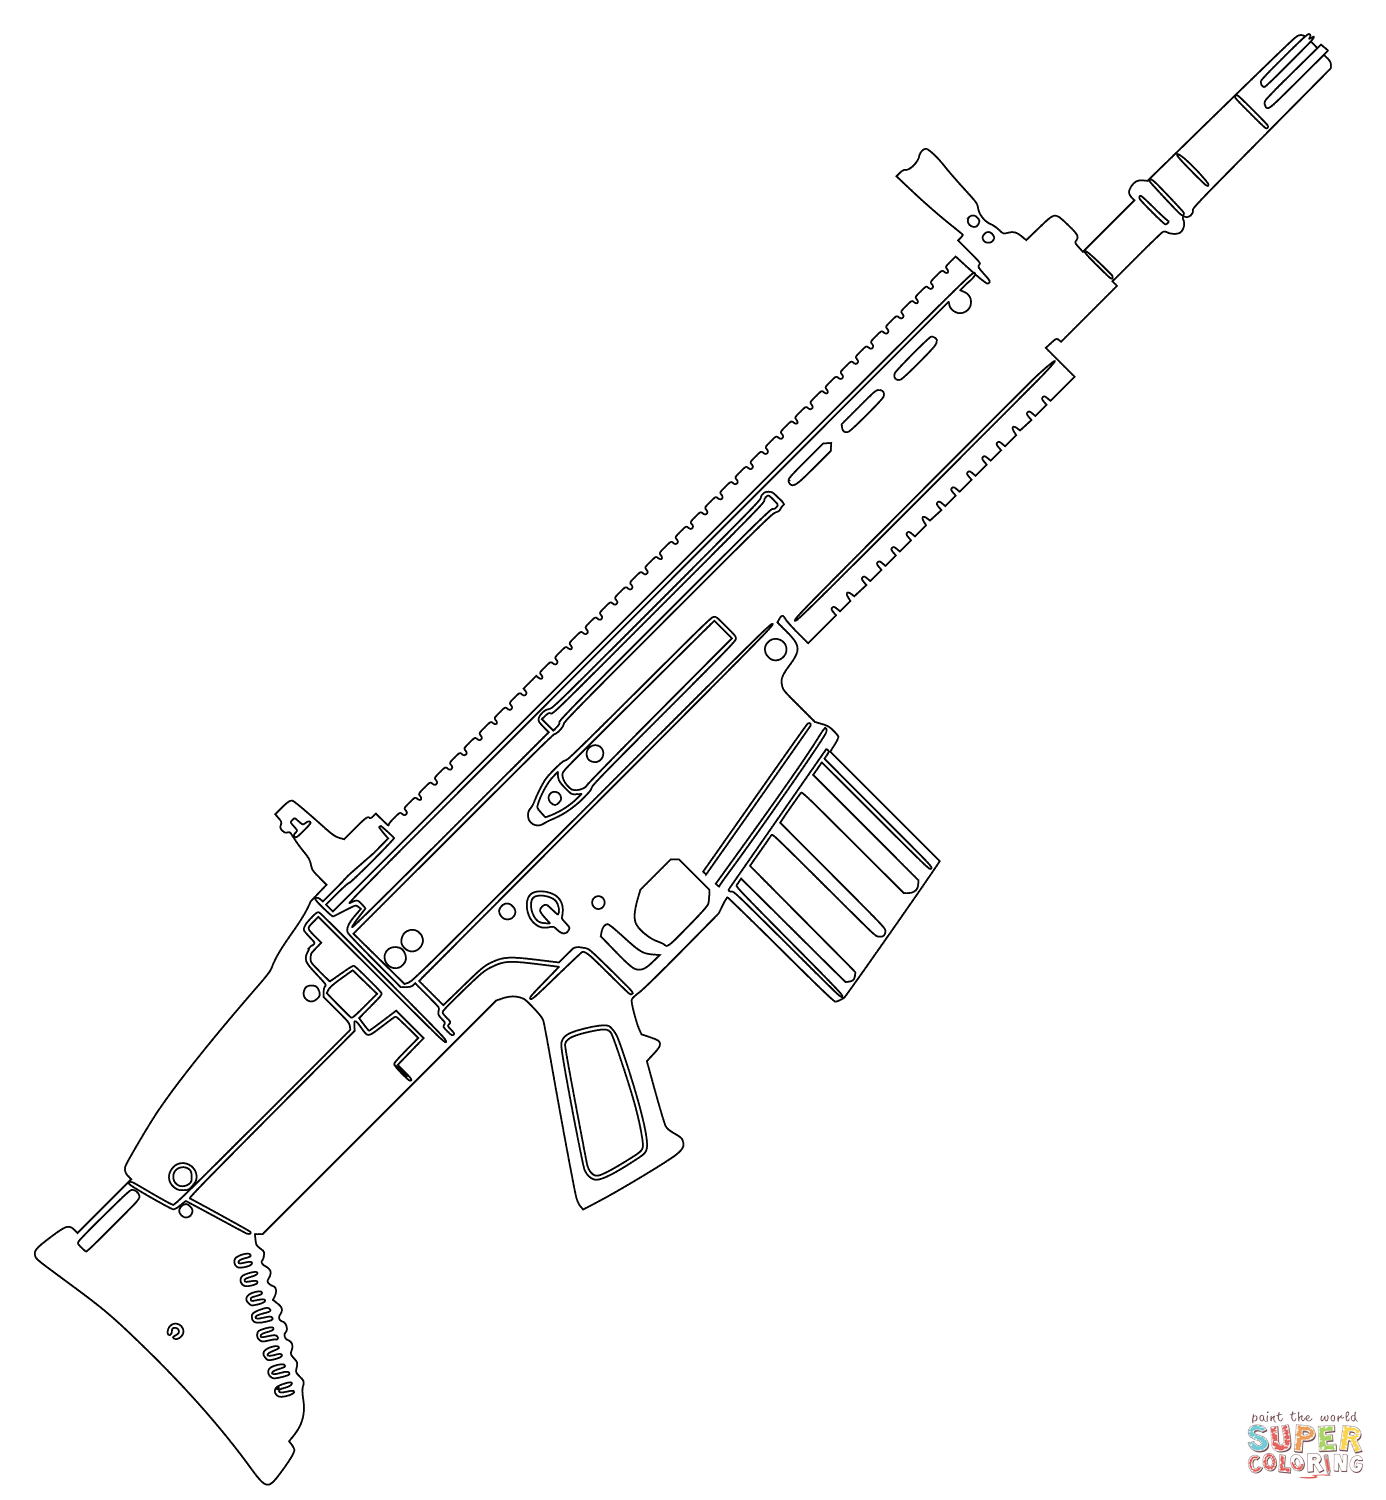 Gun Coloring Pages Fn Scar Assault Rifle Coloring Page Free Printable Coloring Pages